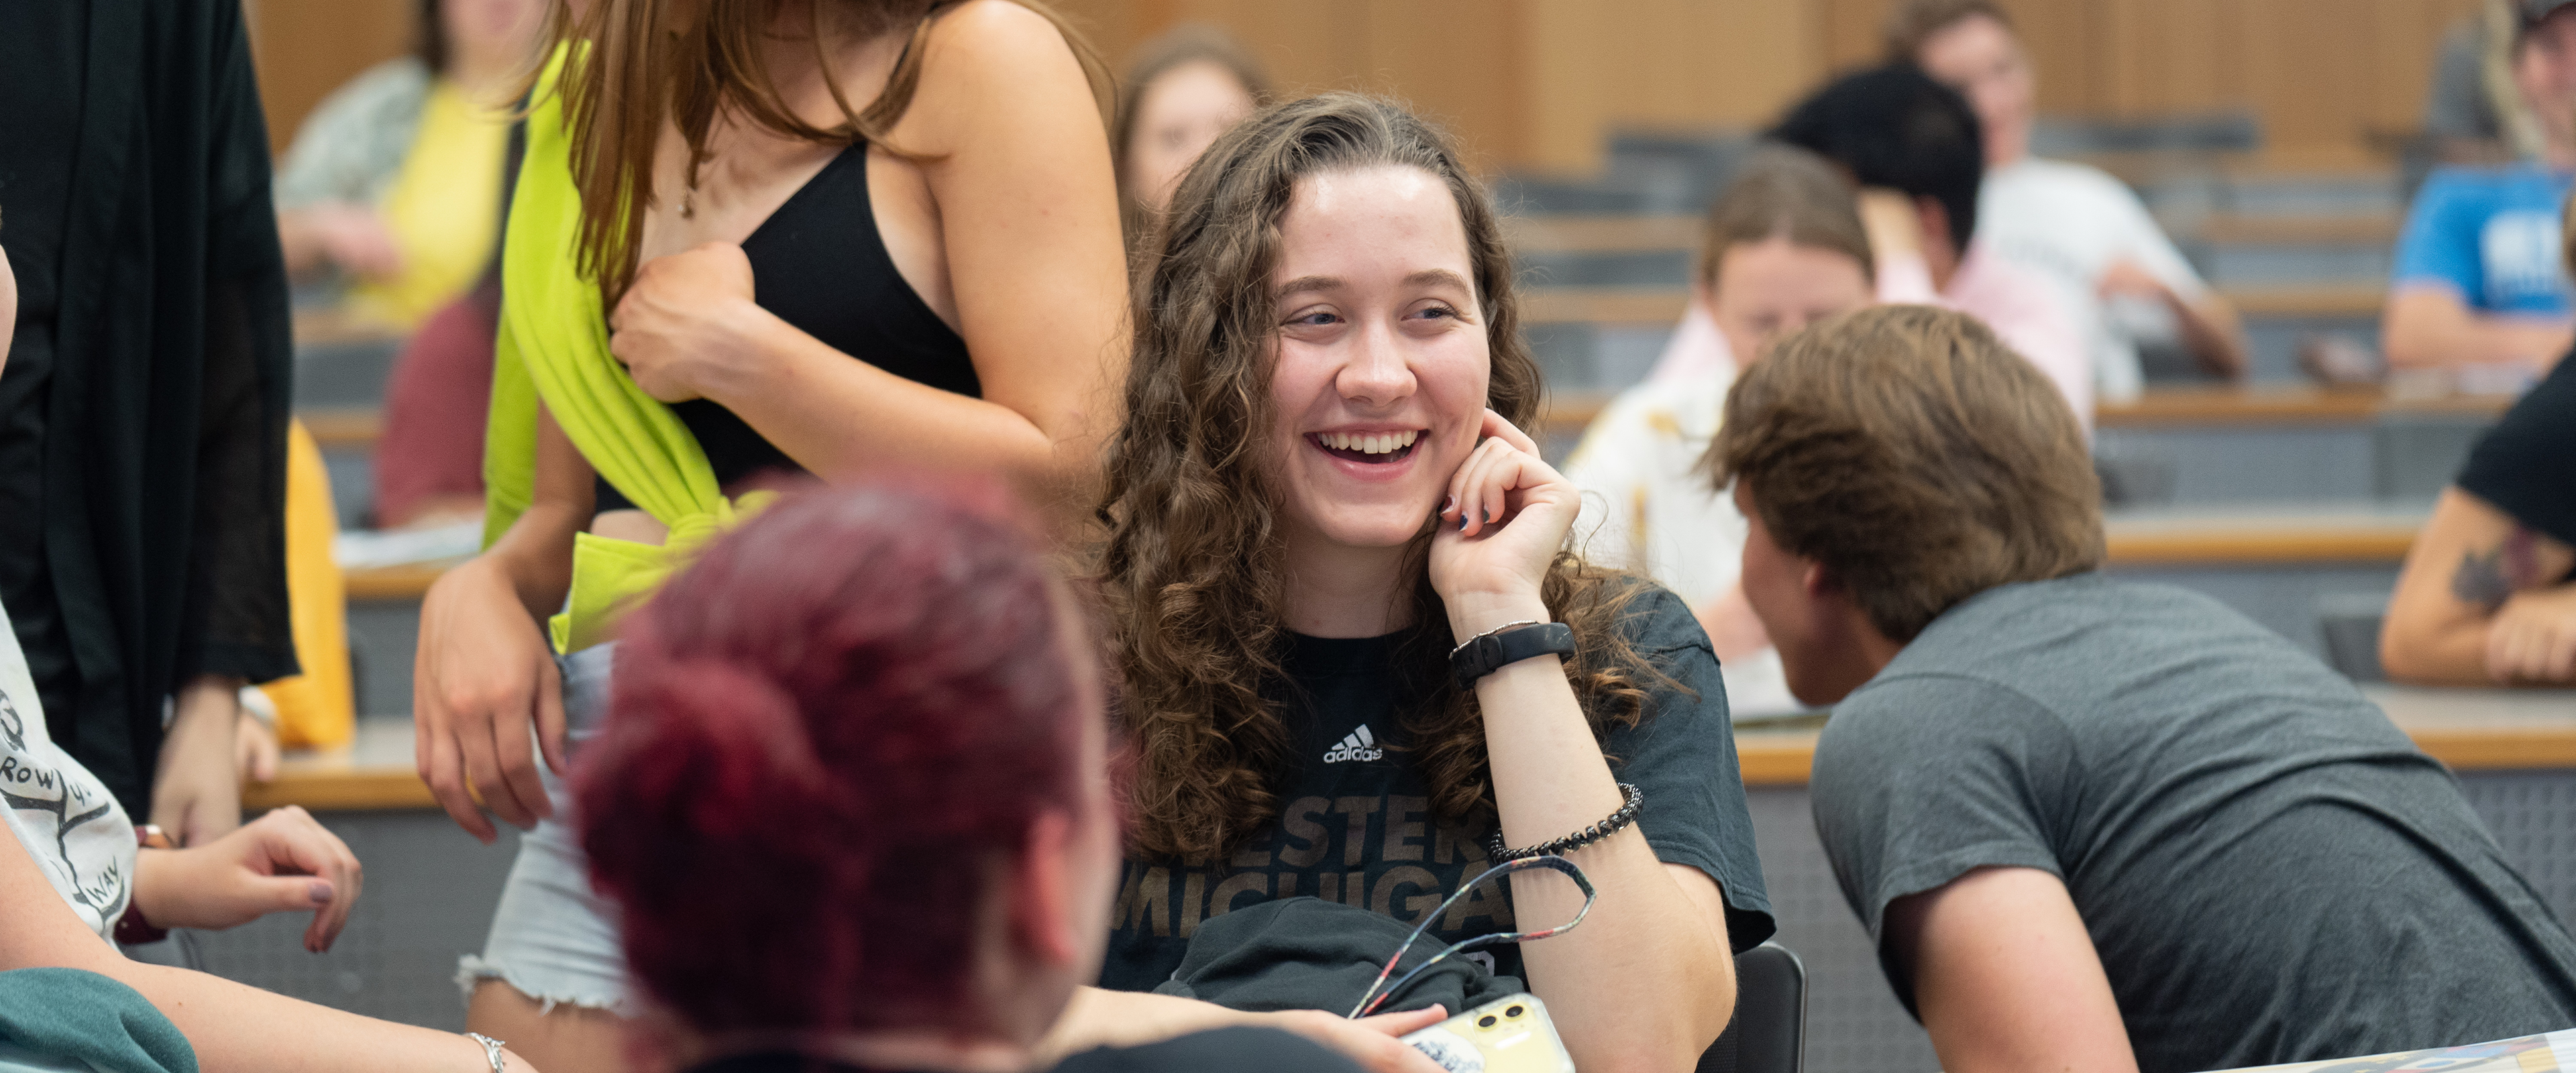 Student laughing during an activity in class